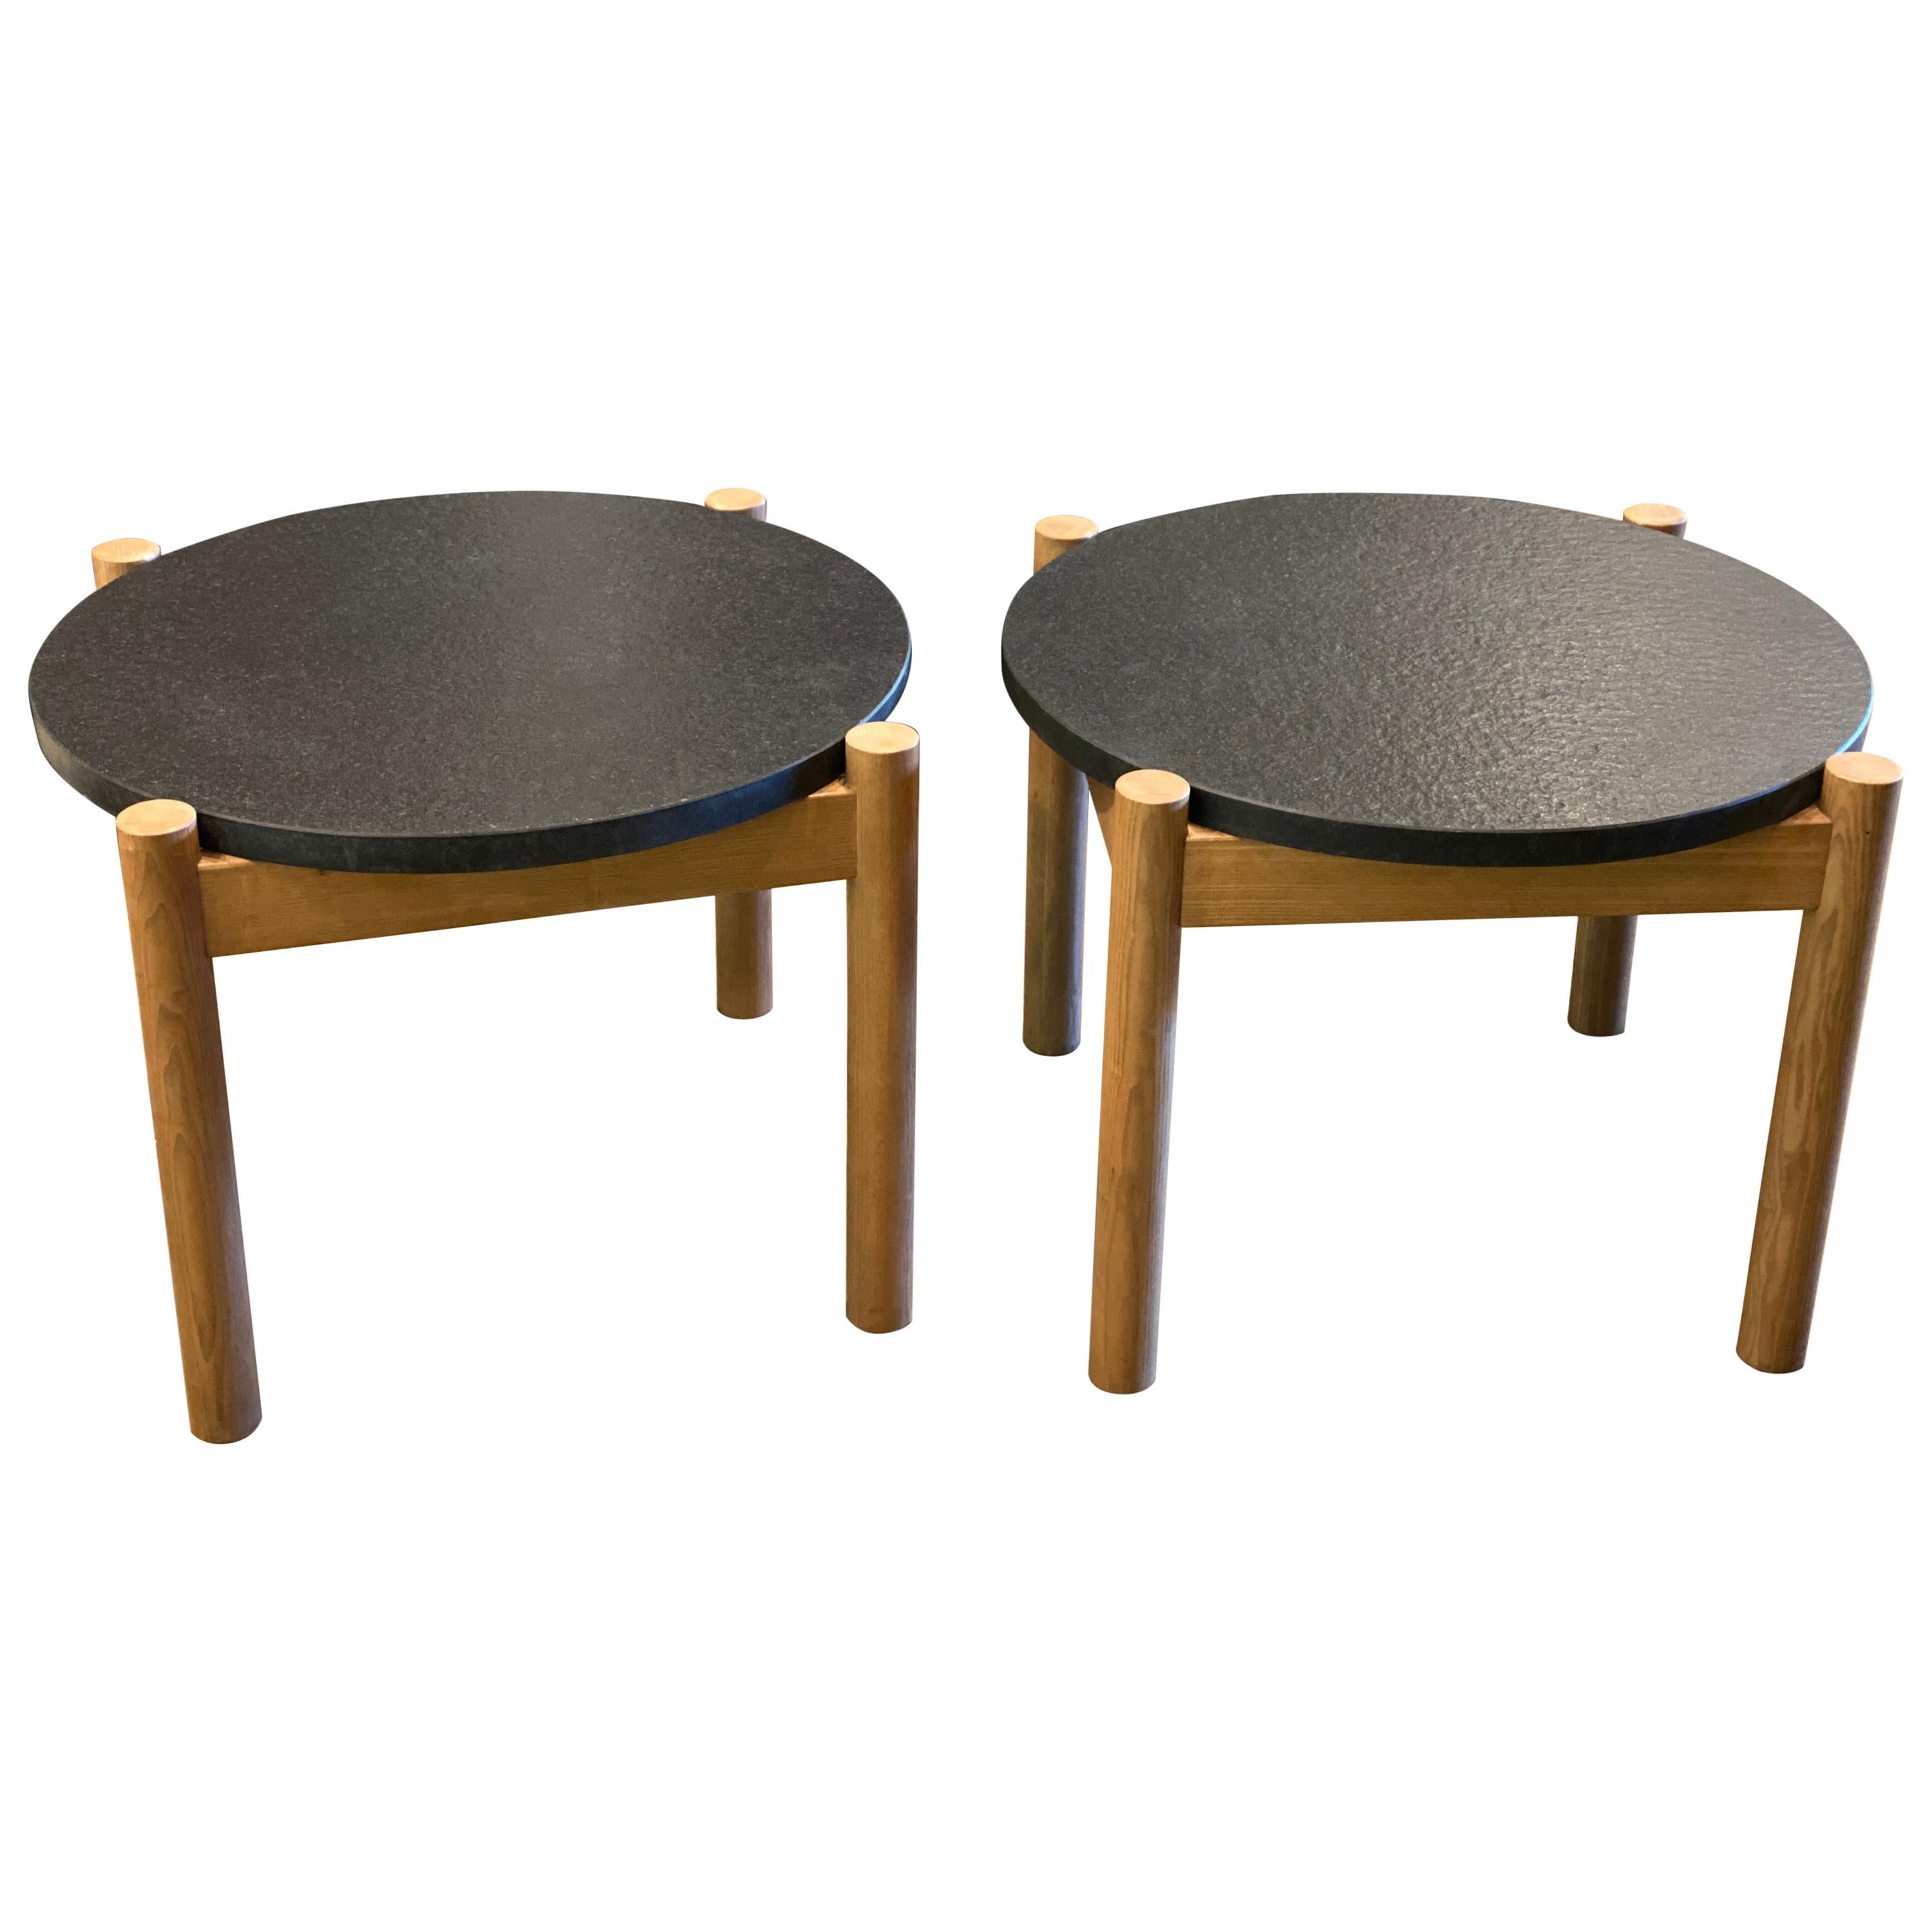 Pair of Elm and Black Stone Side Tables, by Robert Sentou, France, 1968